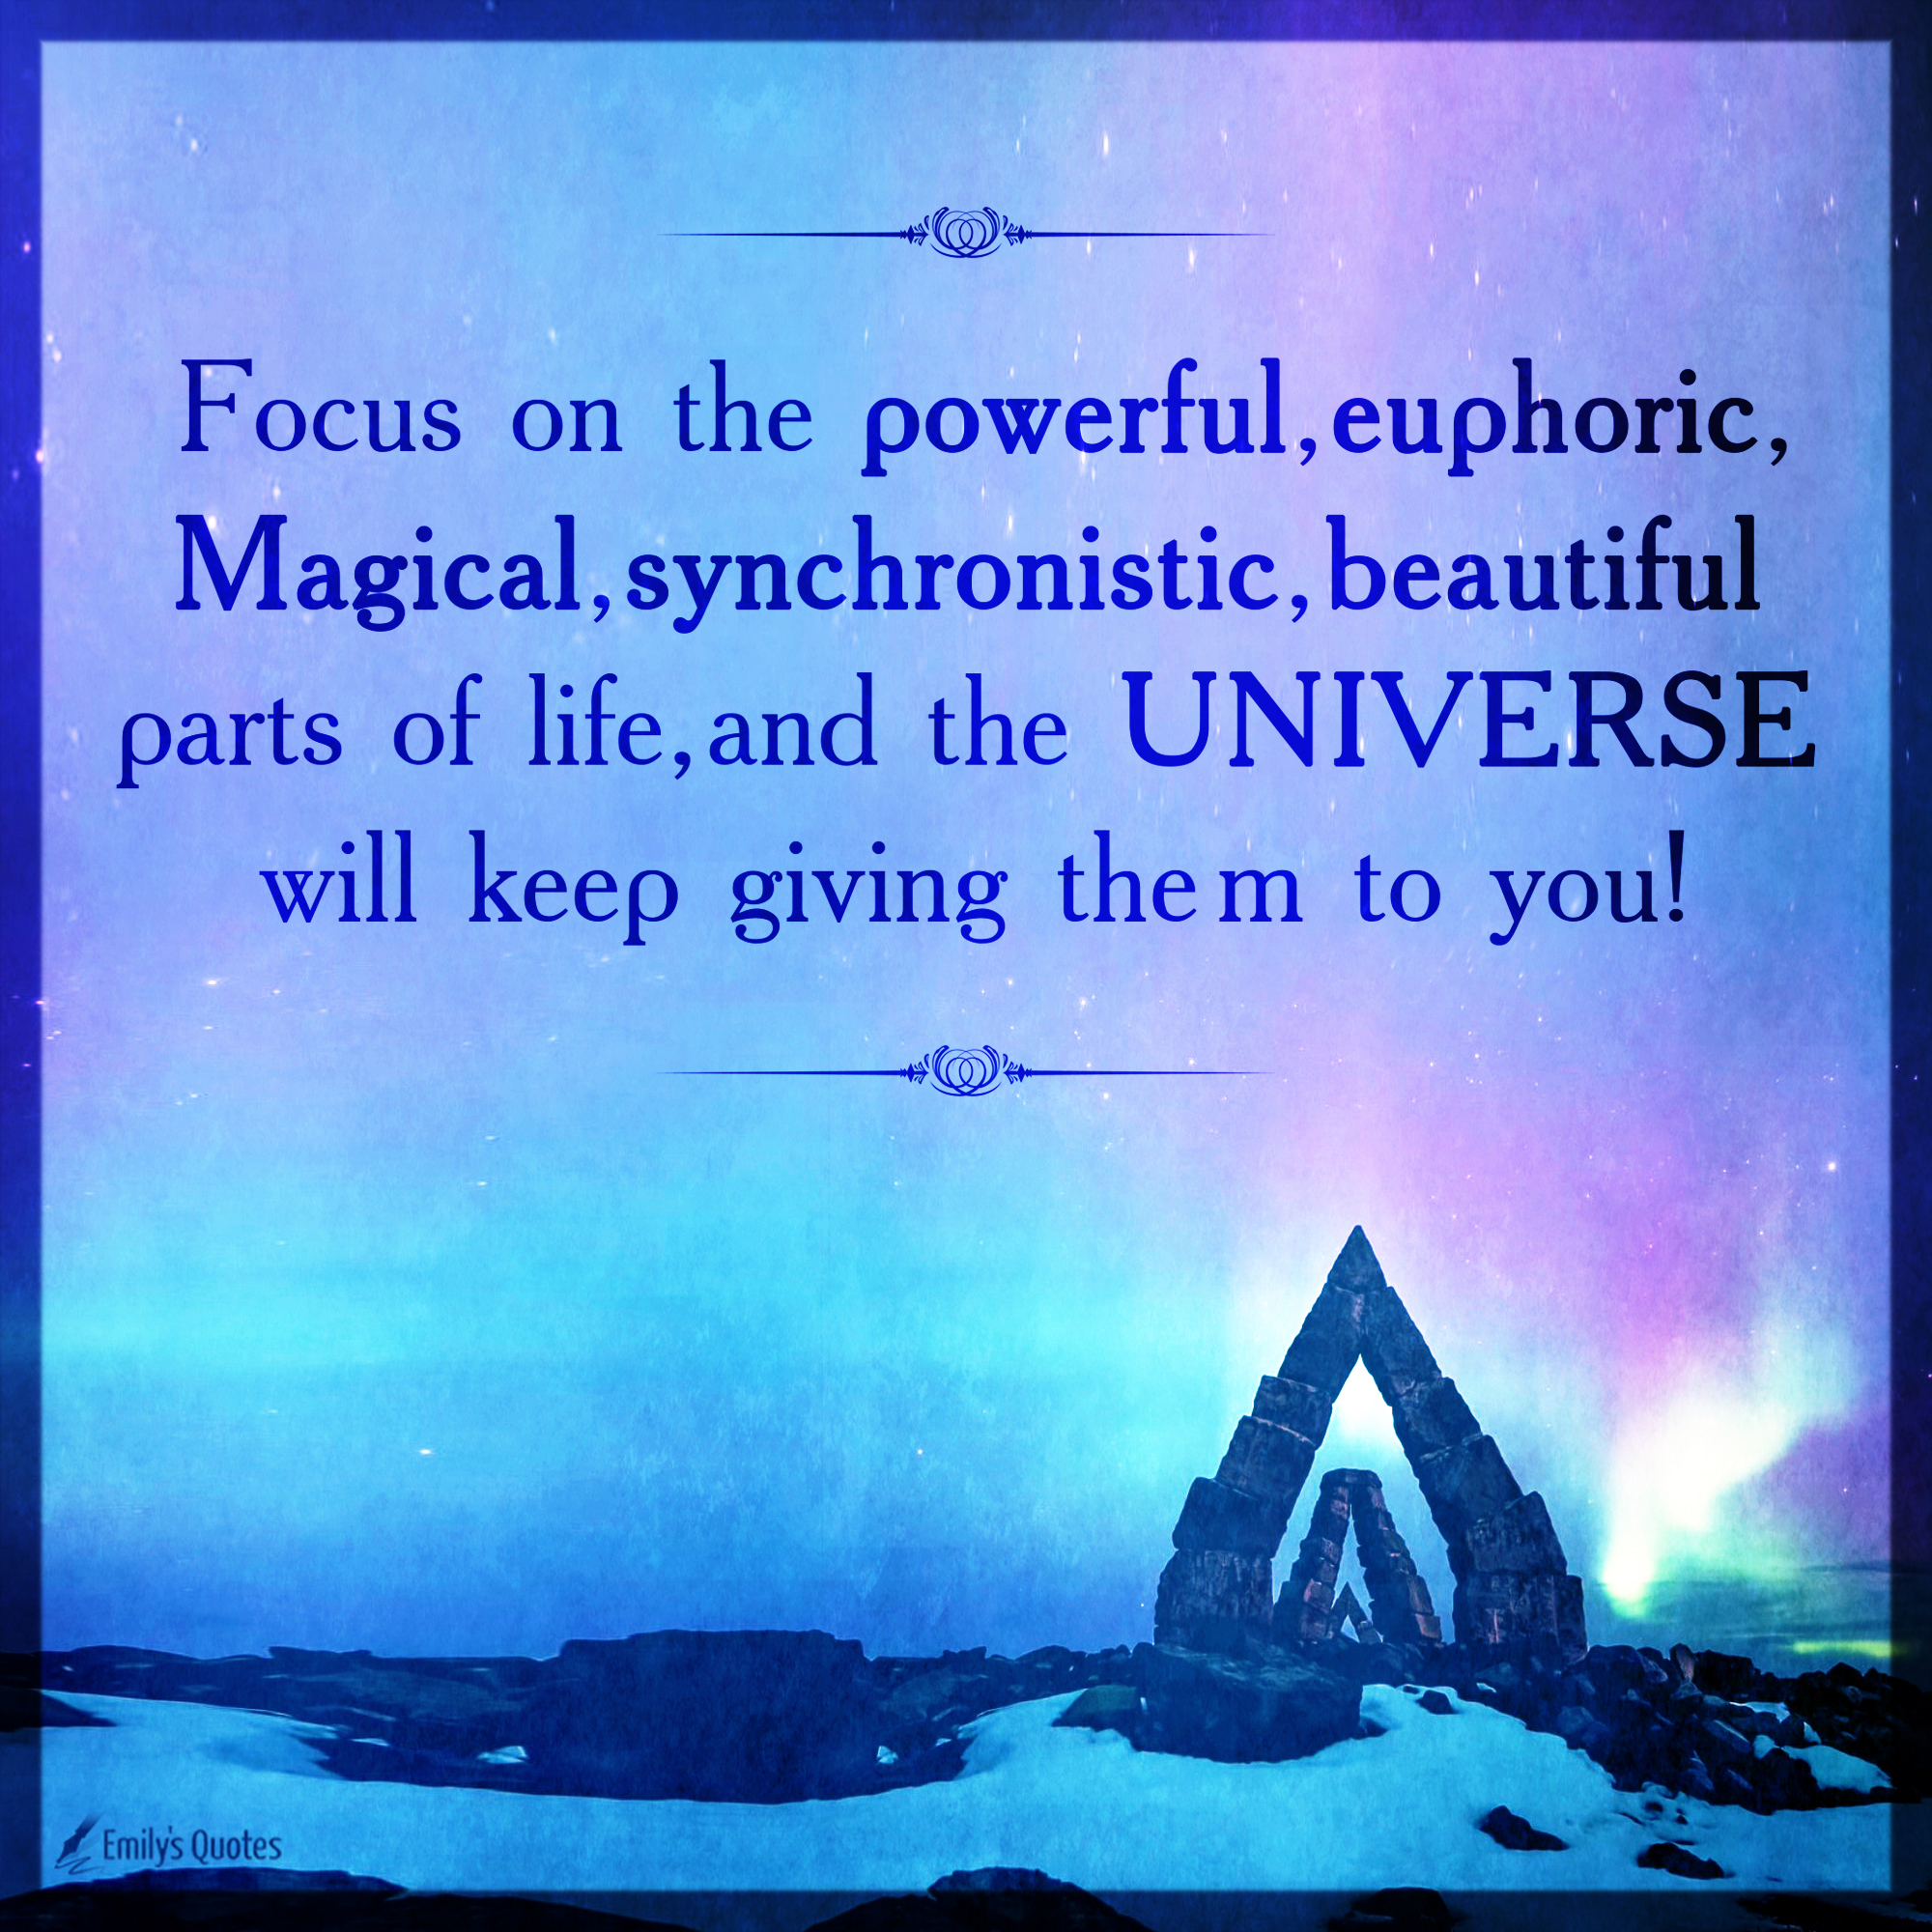 Focus on the powerful, euphoric, Magical, synchronistic, beautiful parts of life